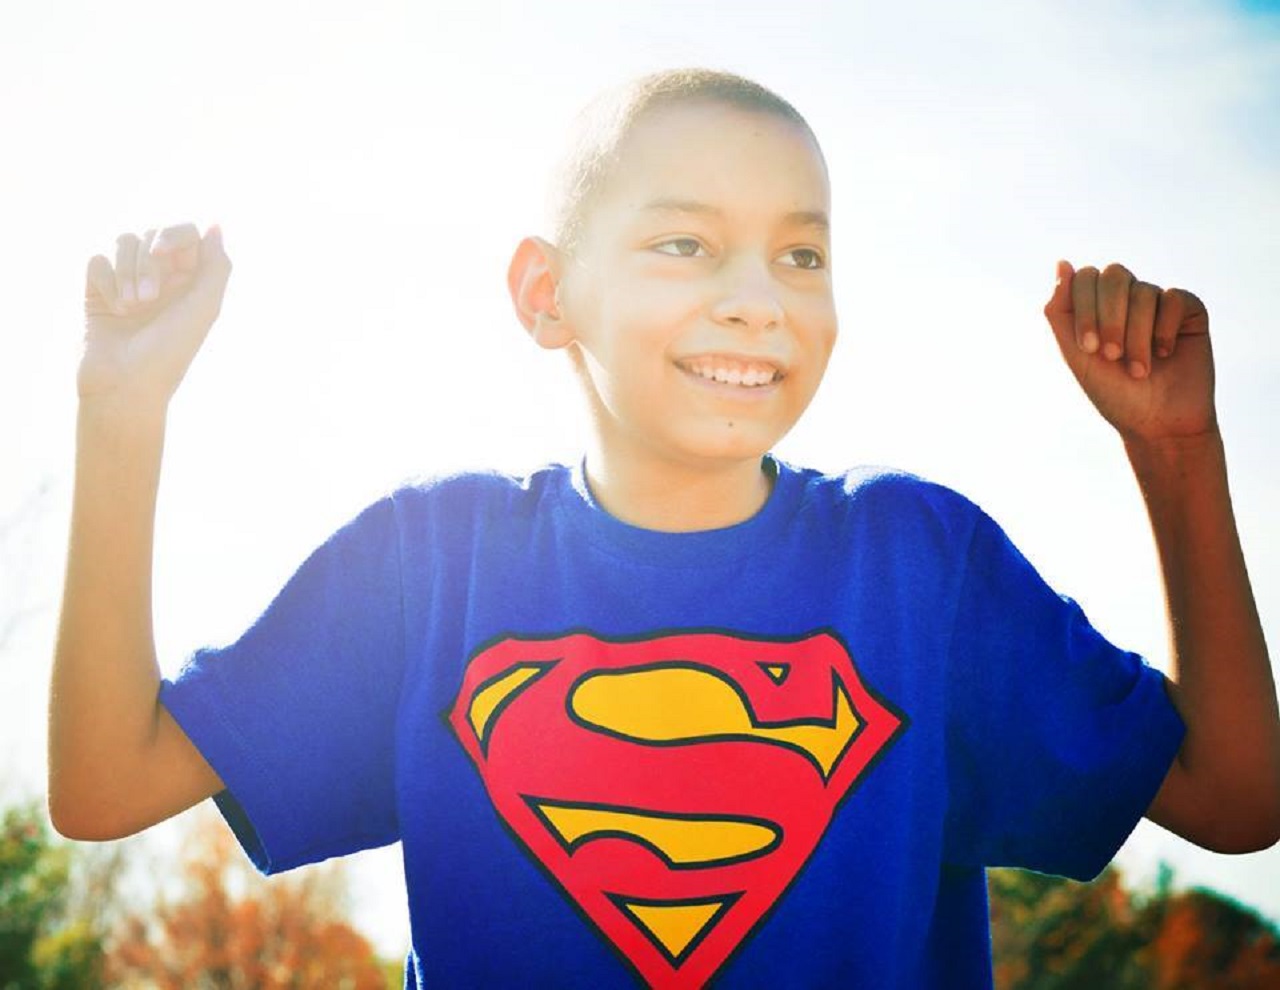 One of Stephanie Smith's photo subjects smiles in a Superman shirt.